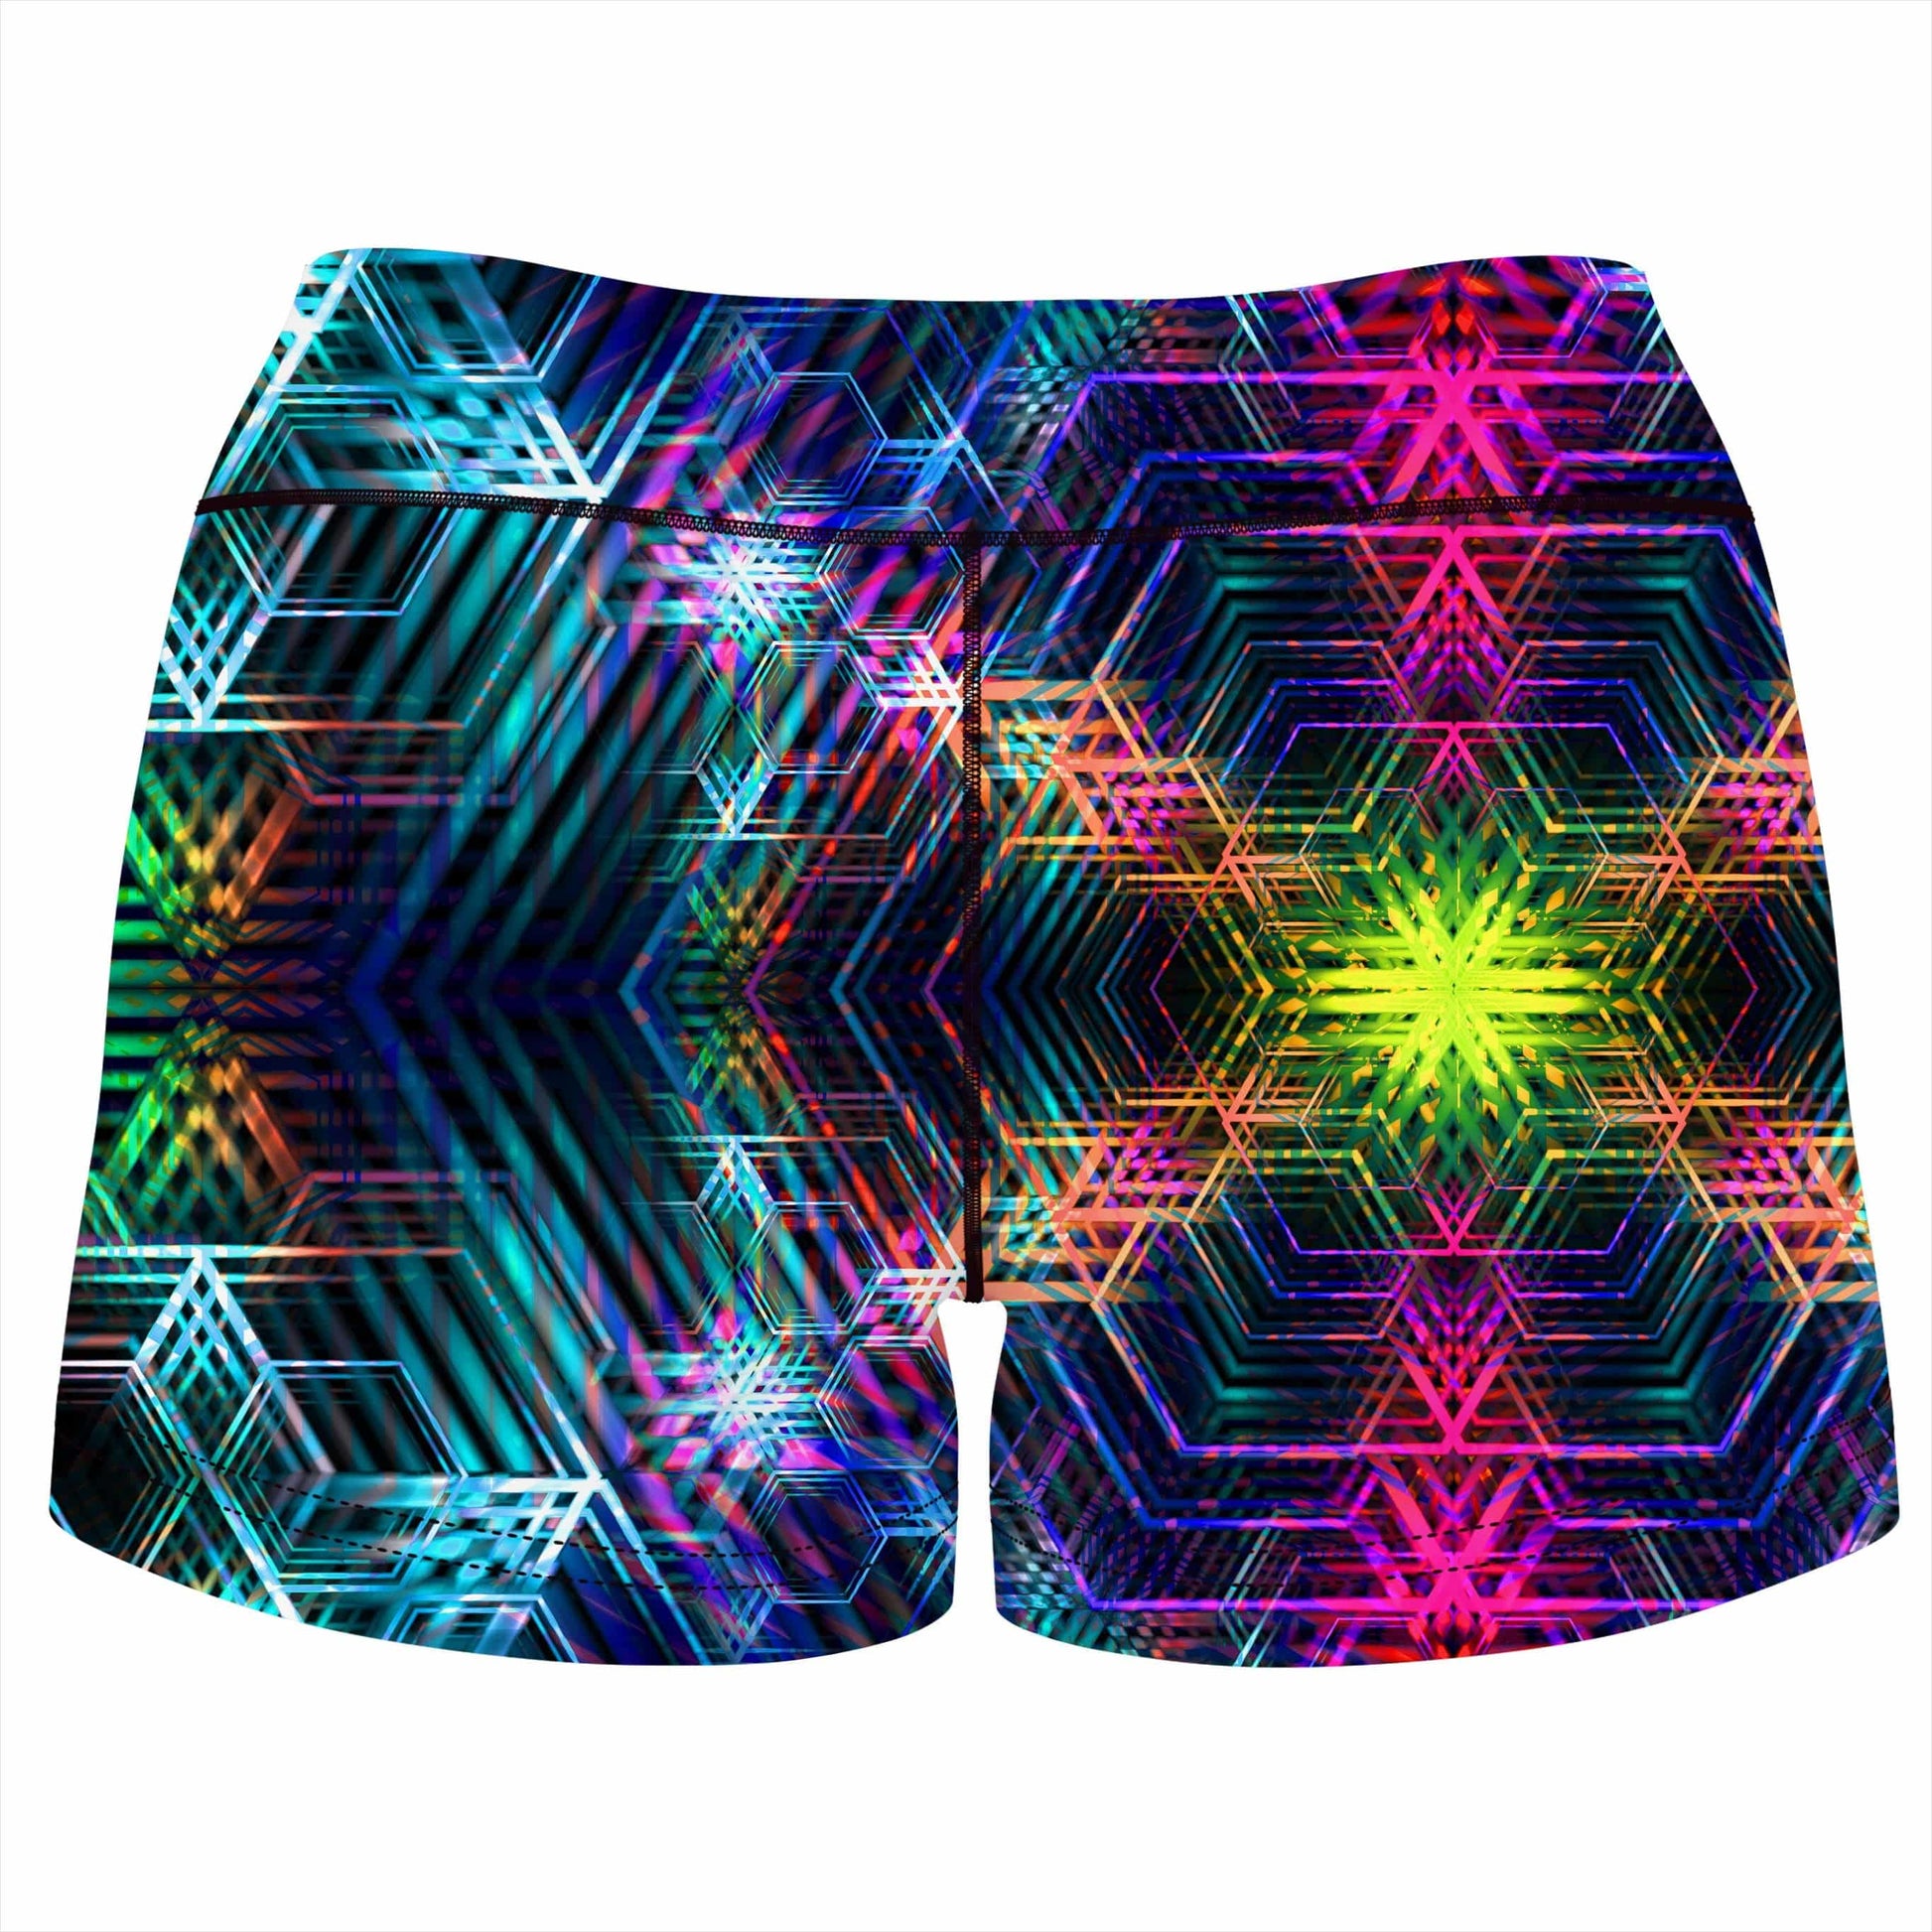 Psychedelia High-Waisted Women's Shorts, Yantrart Design, | iEDM